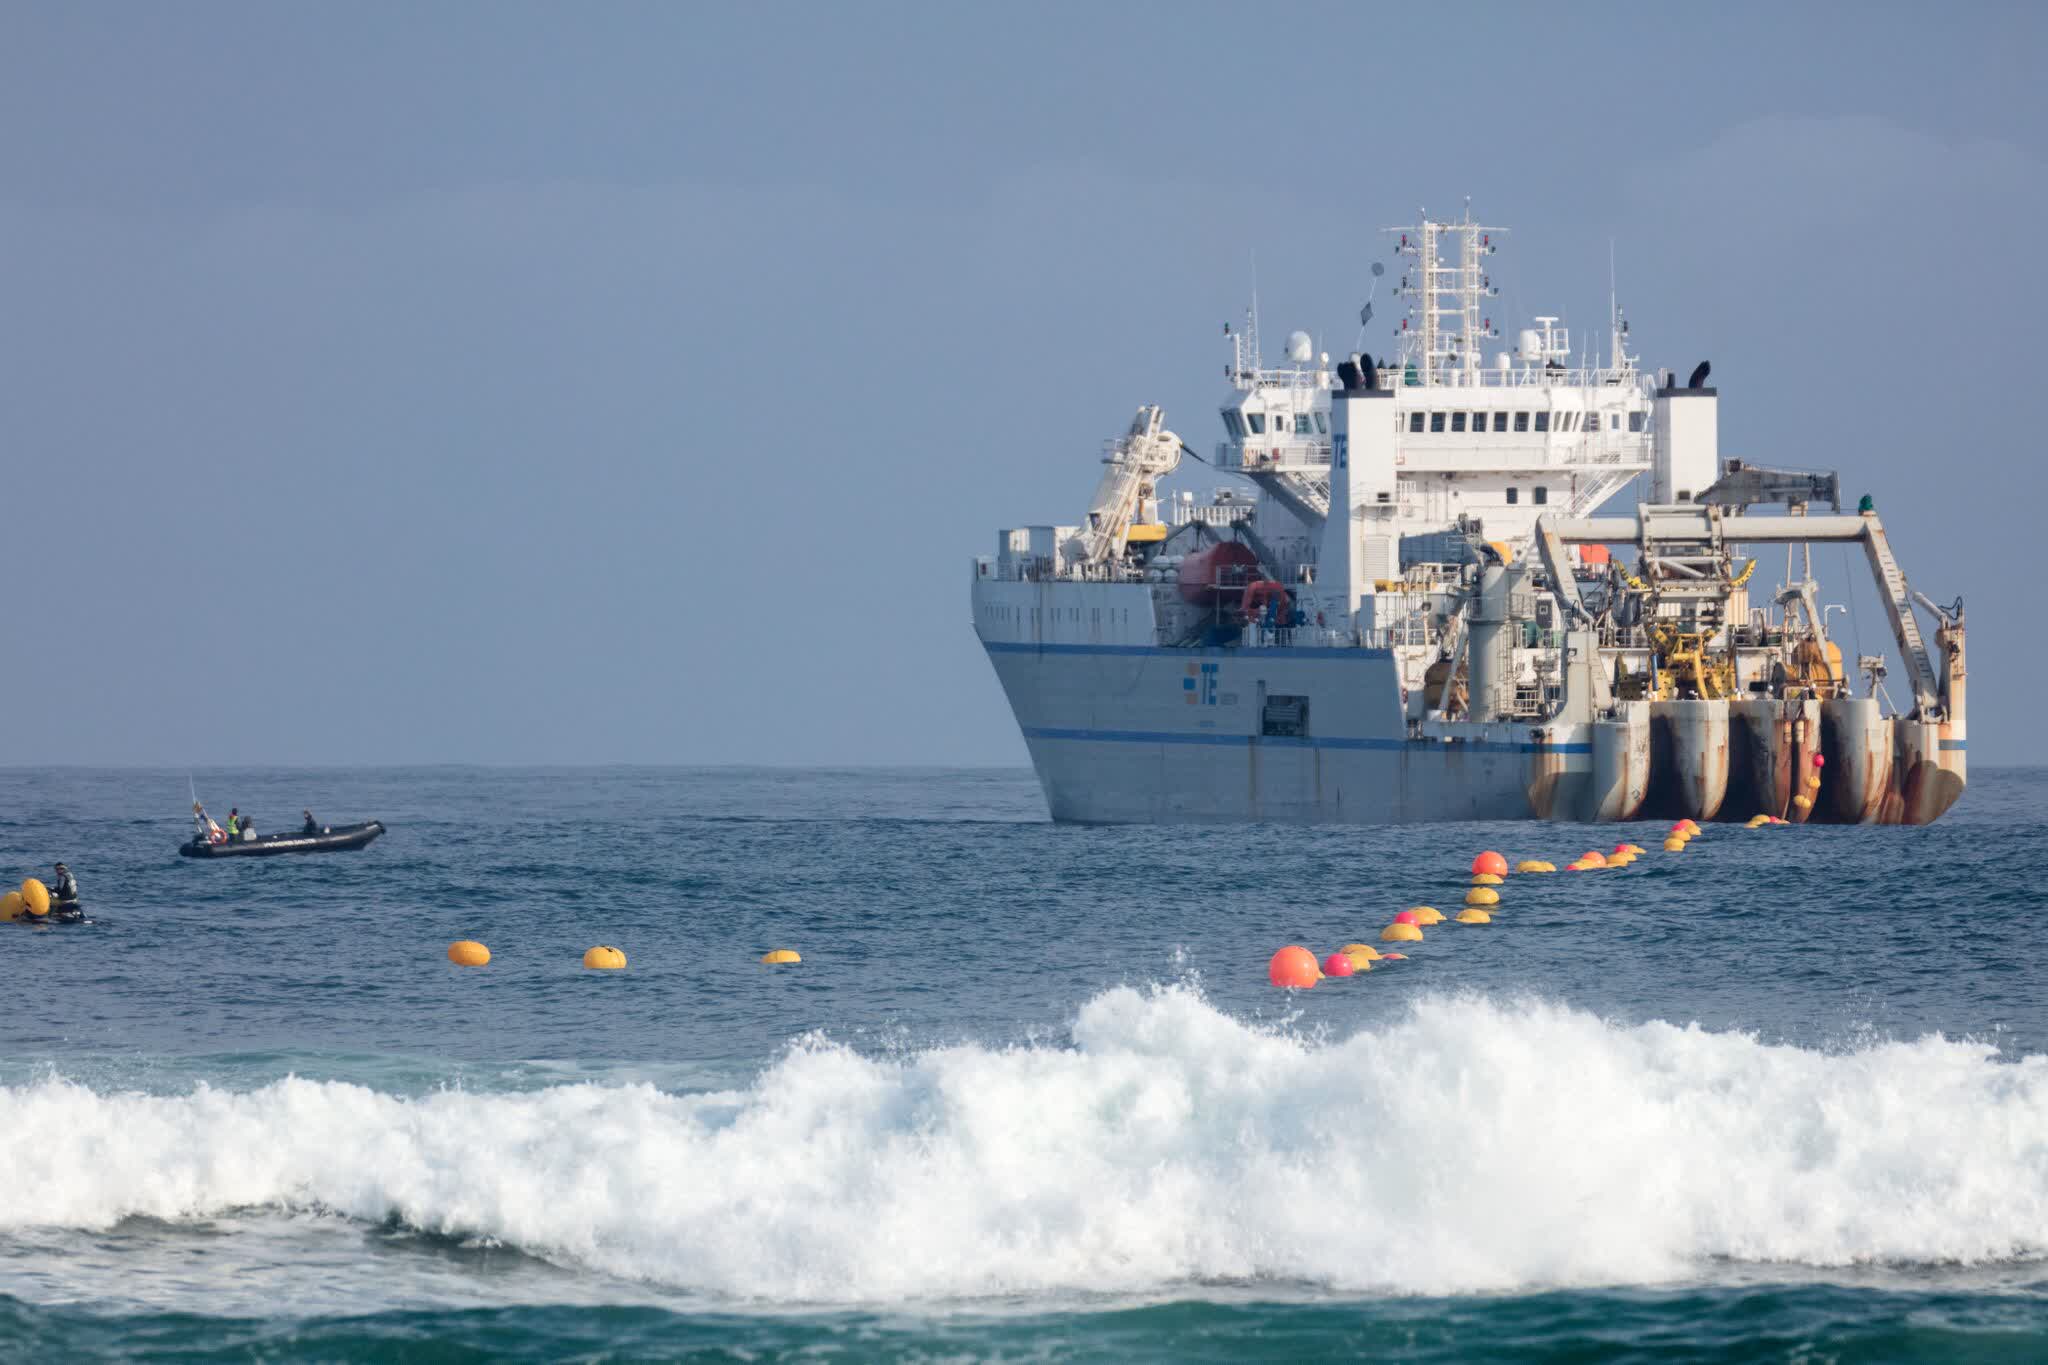 Facebook hires NEC to build a subsea fiber-optic cable between Europe and the US